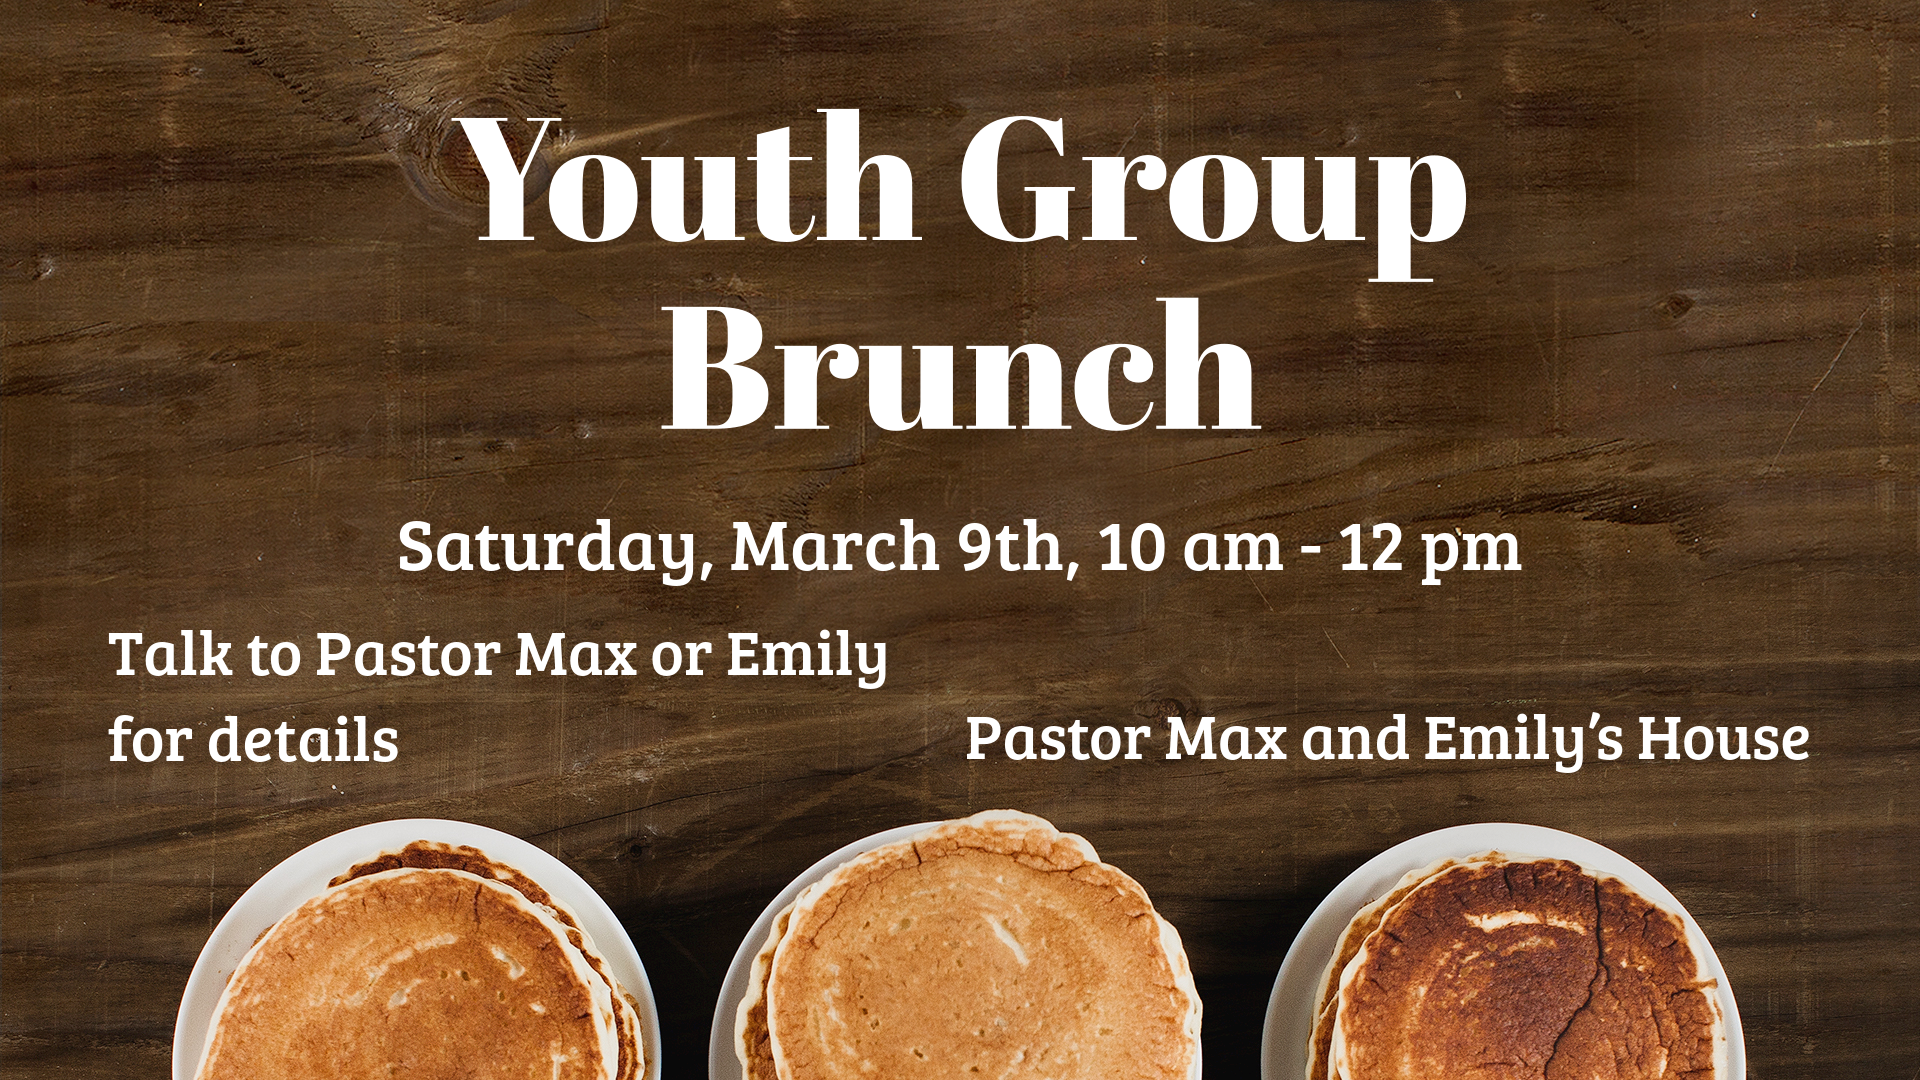 2402-Youth-Group-Brunch